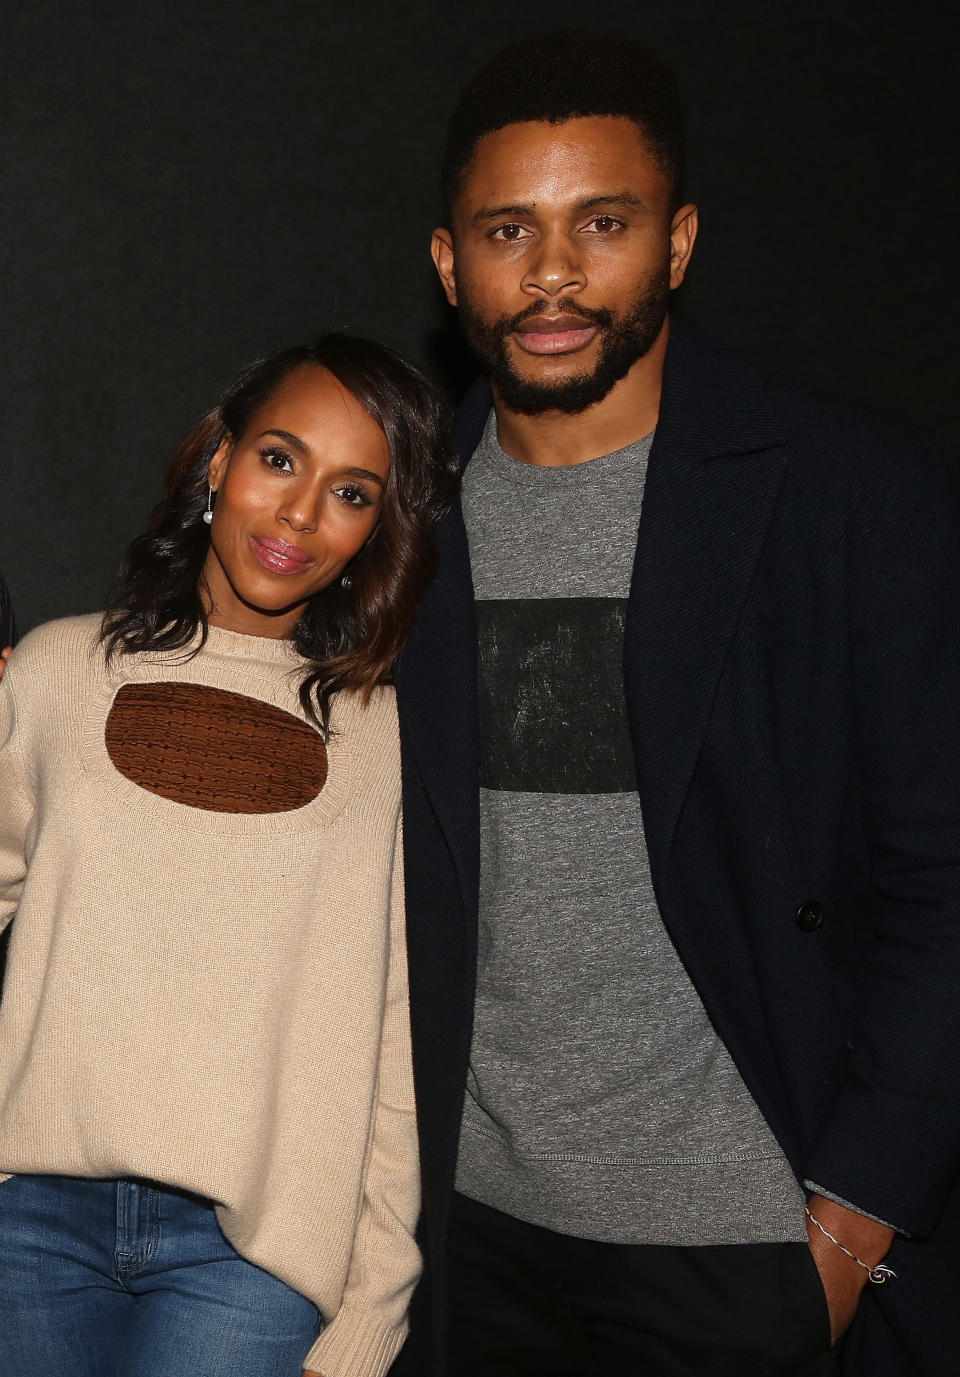 <a href="https://www.huffpost.com/entertainment/topic/kerry-washington" target="_blank" rel="noopener noreferrer">Kerry Washington</a> is as good at keeping a secret as her "Scandal" character, Olivia Pope. The actress wed&nbsp;former San Francisco 49ers player Nnamdi Asomugha in 2013 and the couple reportedly now&nbsp;have&nbsp;<a href="https://www.refinery29.com/en-us/2018/10/215400/kerry-washington-has-three-children" target="_blank" rel="noopener noreferrer">three kids.</a> <br />&lt;br&gt;&lt;br&gt;<br />During a <a href="https://www.eonline.com/news/748602/kerry-washington-speaks-out-on-nnamdi-asomugha-divorce-rumors" target="_blank" rel="noopener noreferrer">2016&nbsp;South by Southwest panel</a>&nbsp;in Austin, Washington opened up about why she prefers to keep her private life private.&nbsp;<br />&lt;br&gt;&lt;br&gt;<br />"If I don't talk about my personal life, it means I don't talk about my personal life," <a href="https://www.eonline.com/news/748602/kerry-washington-speaks-out-on-nnamdi-asomugha-divorce-rumors" target="_blank" rel="noopener noreferrer">she said.</a> "That means not only did I not tell you when I was getting married, it also means if somebody has rumors about what's going on in my marriage, I don't refute them, because I don't talk about my personal life."